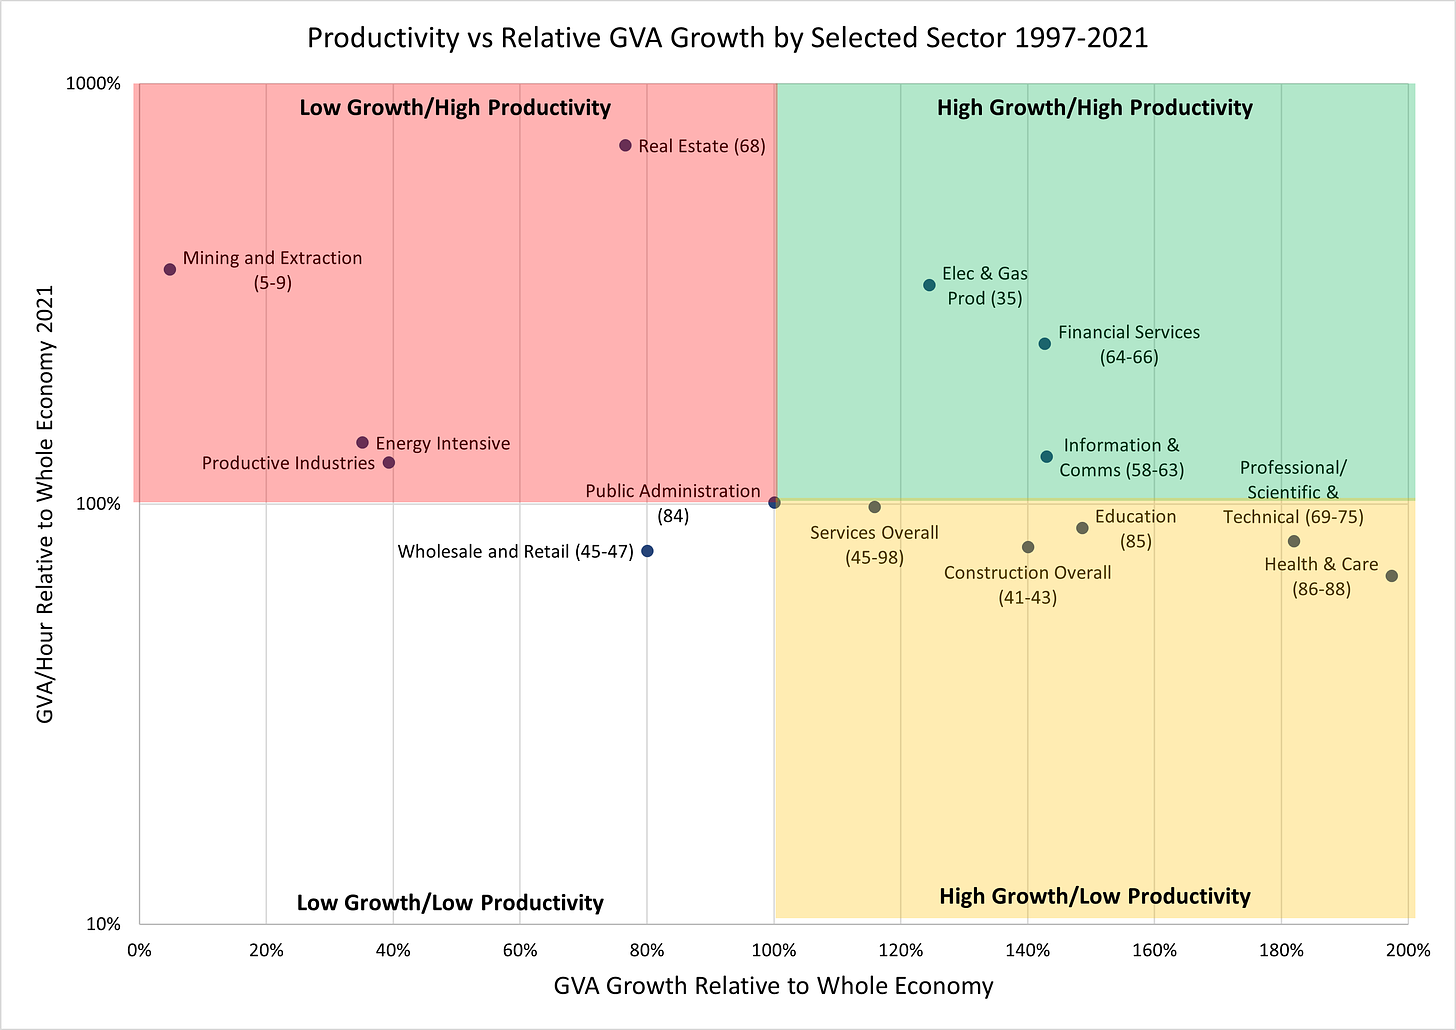 Figure 1 - Relative Productivity vs Relative Growth 1997-2021 for selected sectors